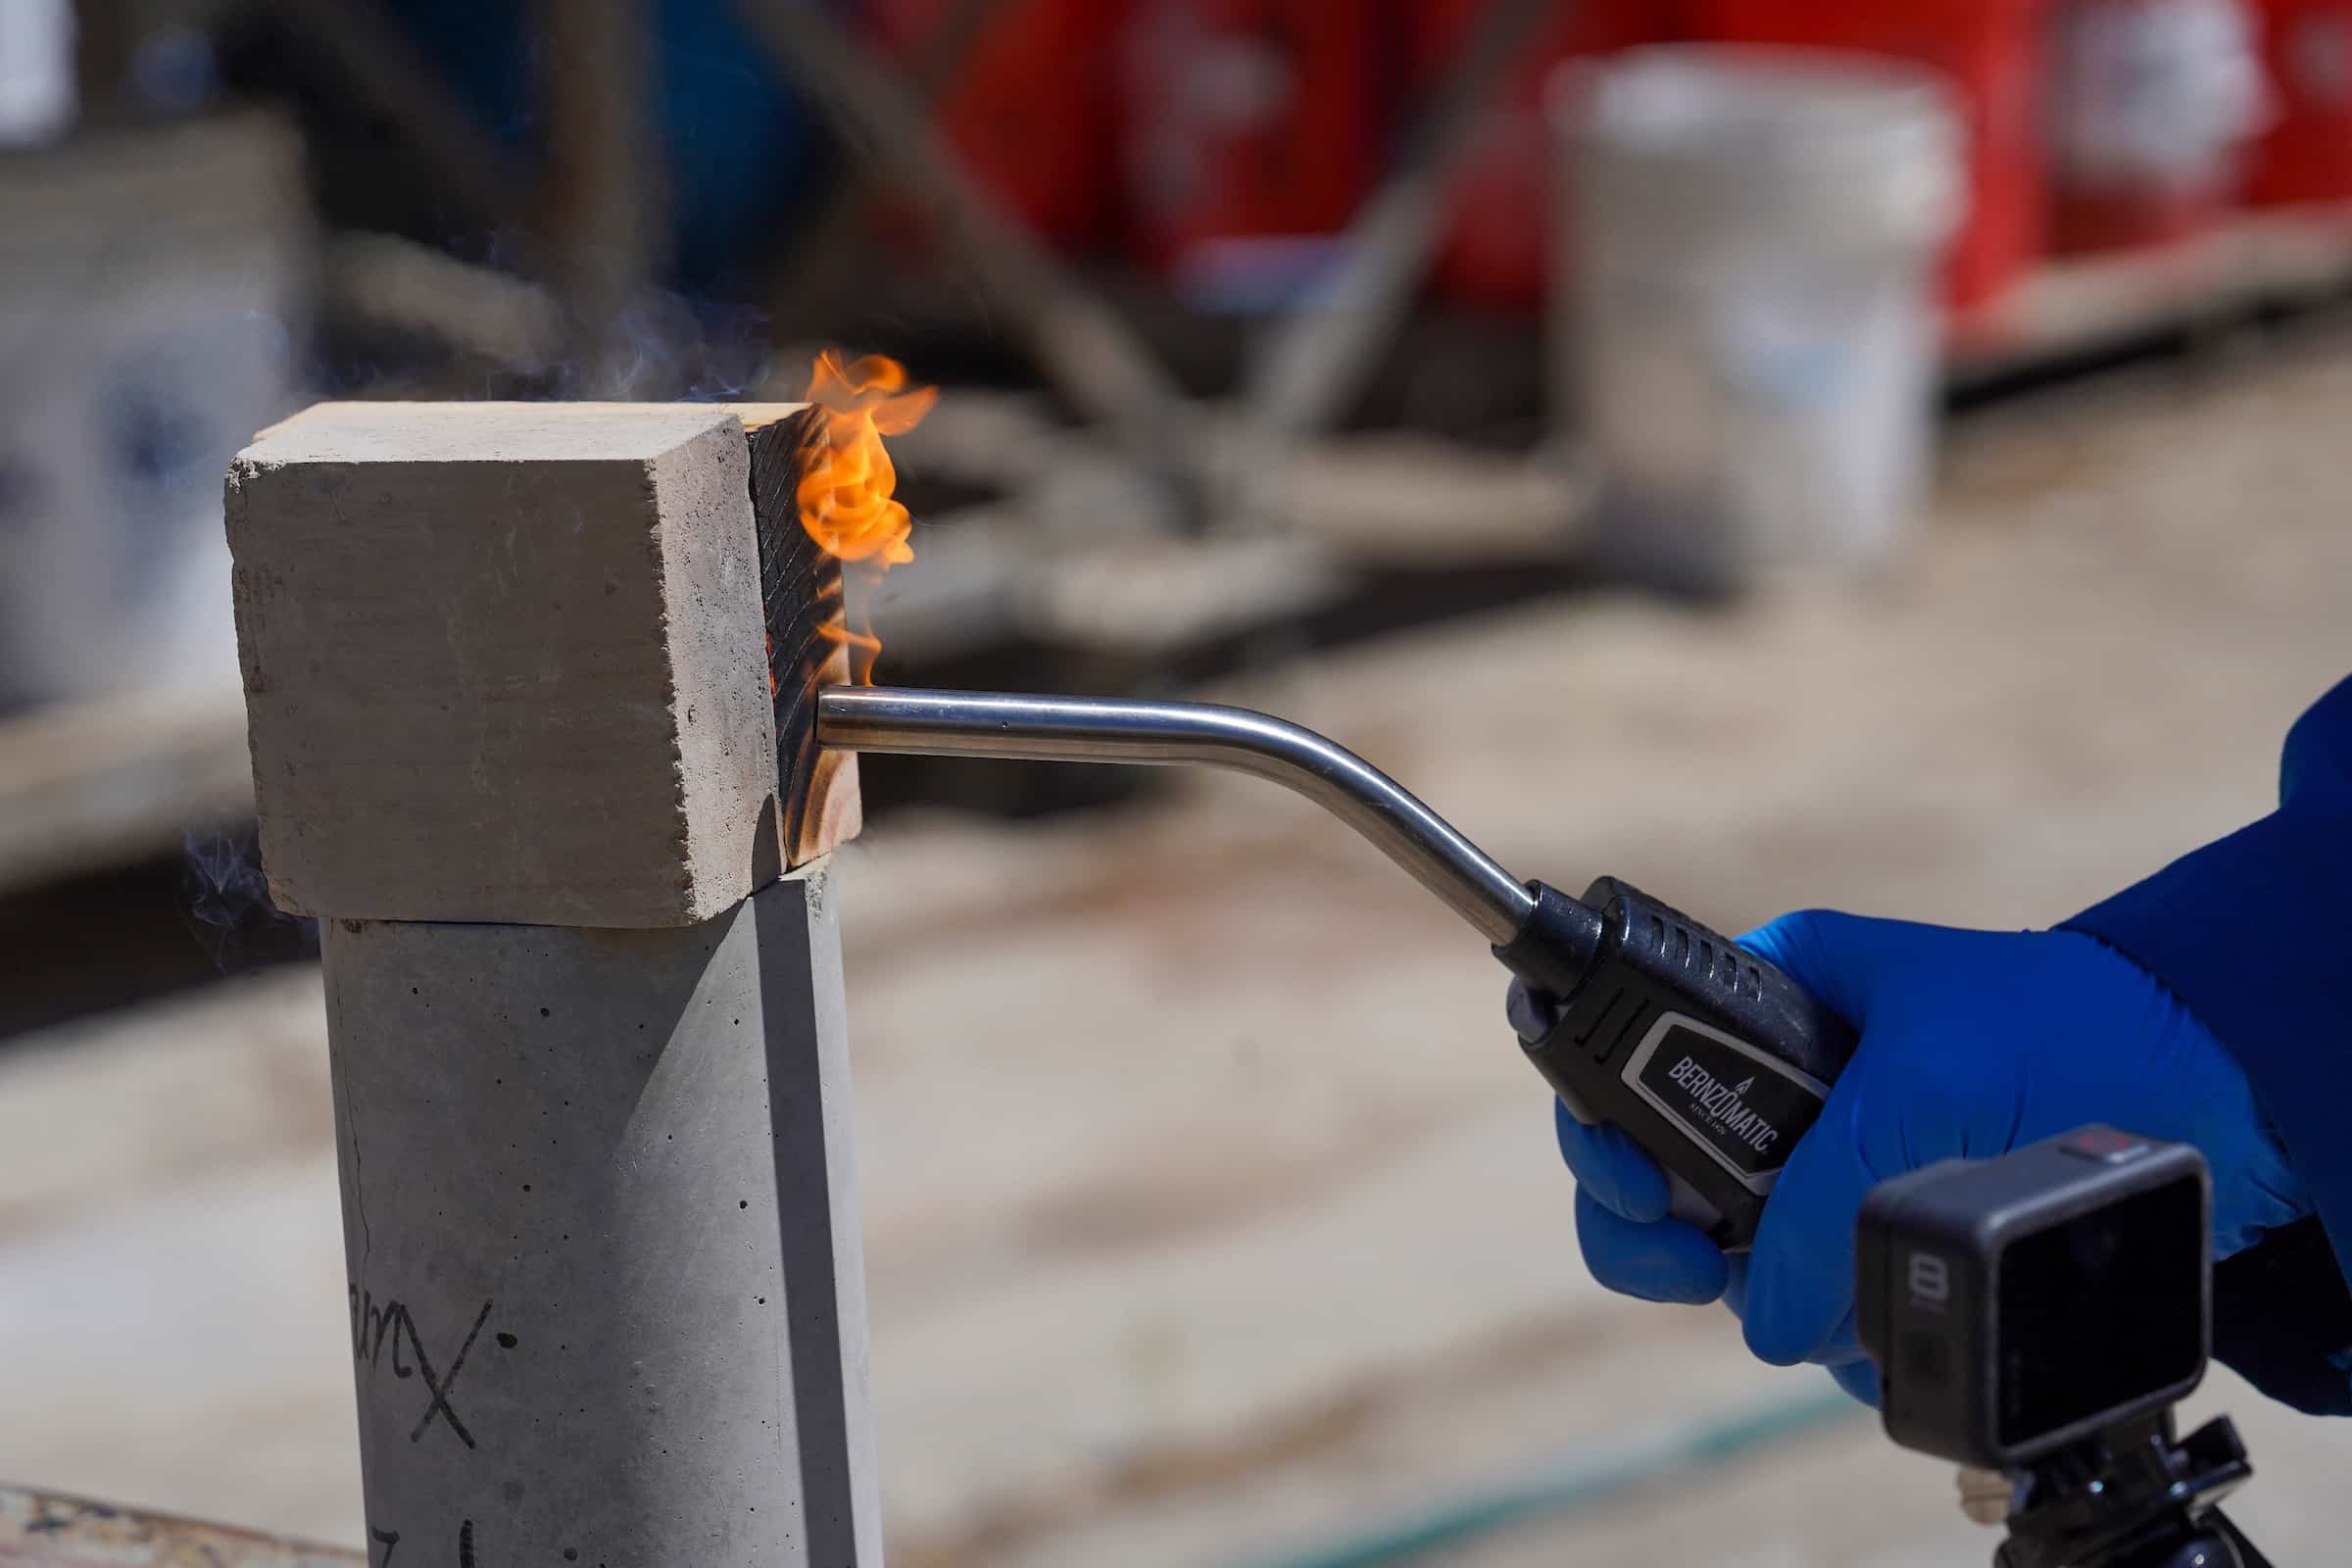 A blow torch of 3,400 degrees Fahrenheit blasts a block of wood and an earth block at the same time.